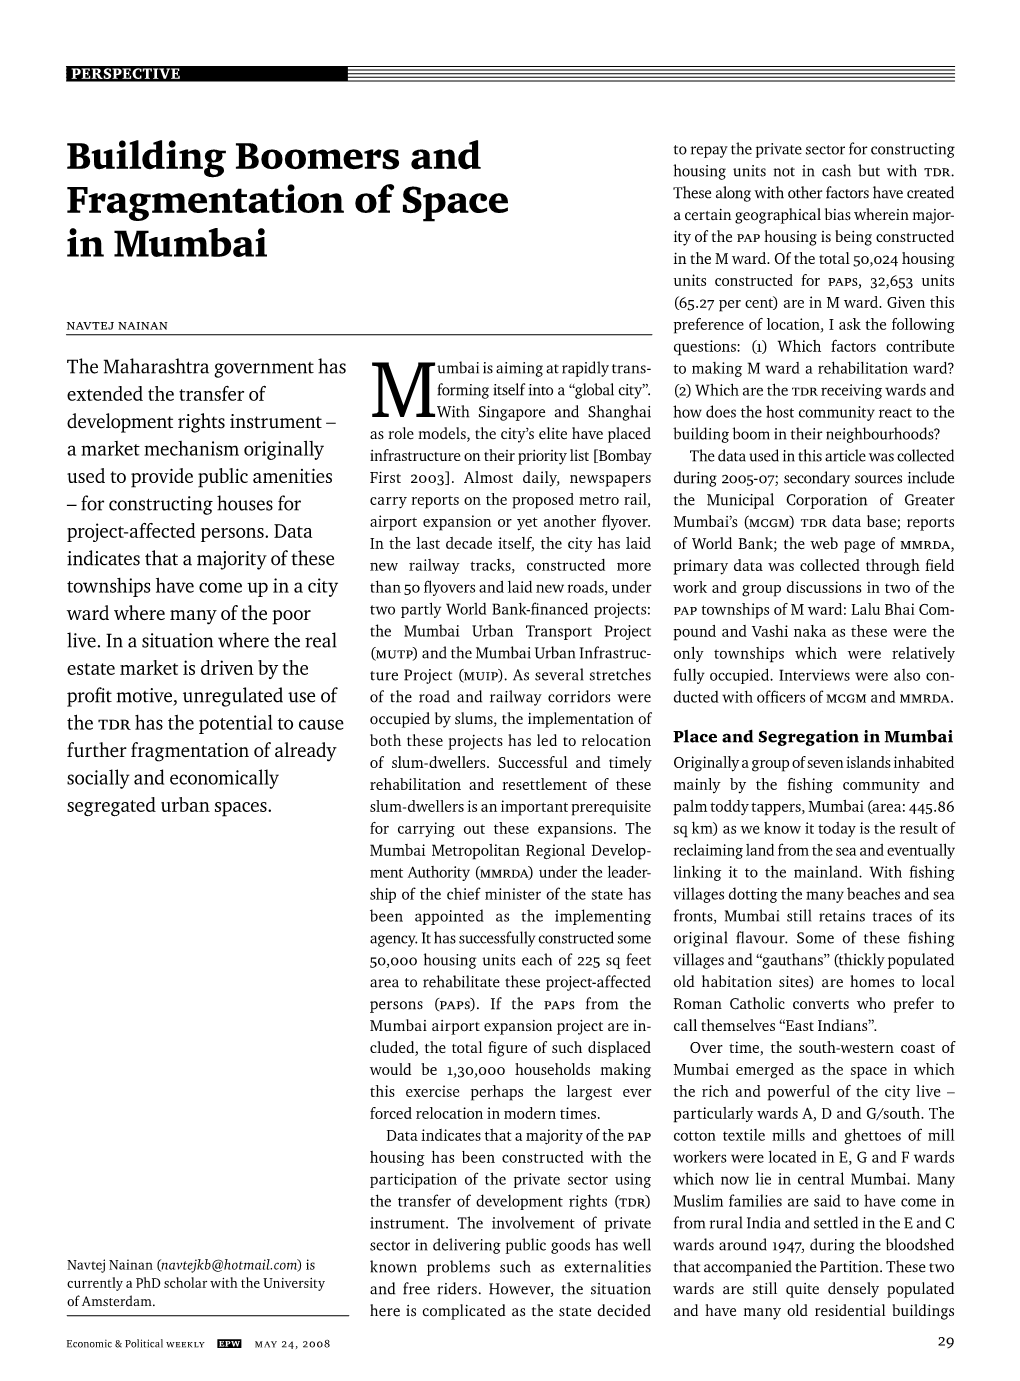 Building Boomers and Fragmentation of Space in Mumbai